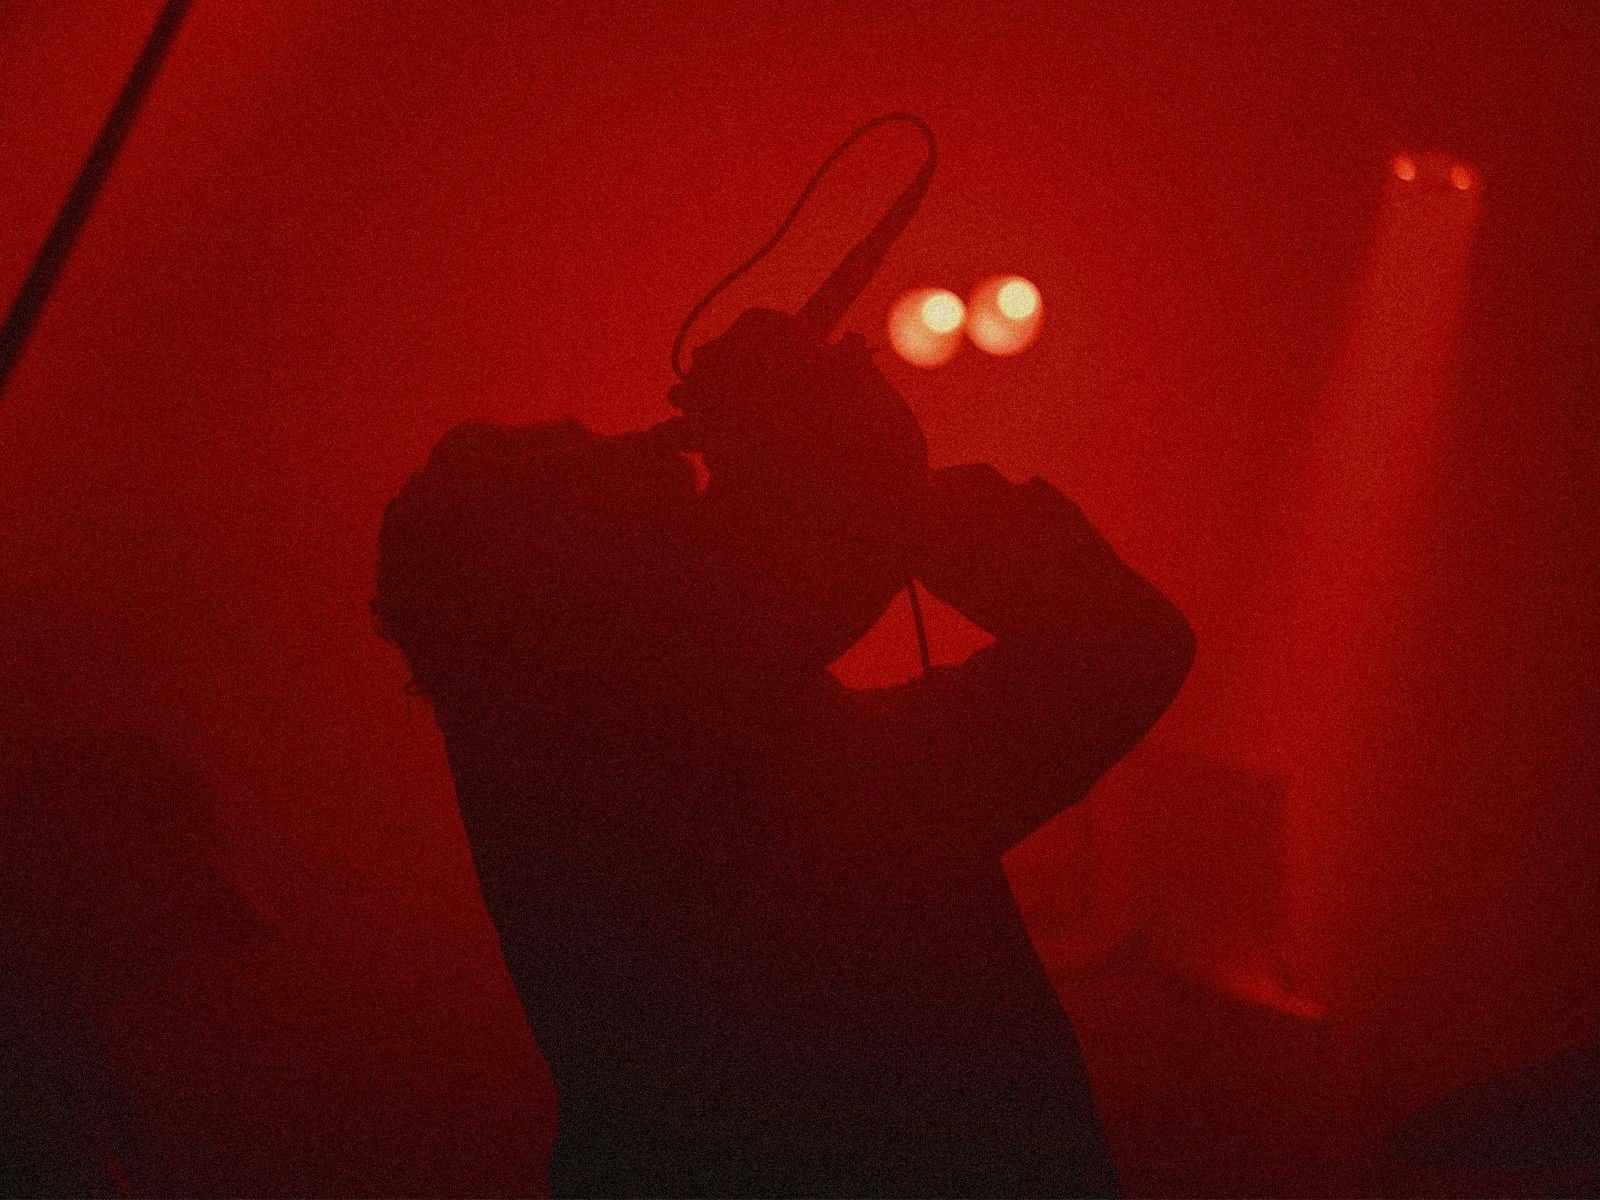 Member of Drowning Horse sings into a microphone. Around them is a heavily hazed stage, lit by red lights.